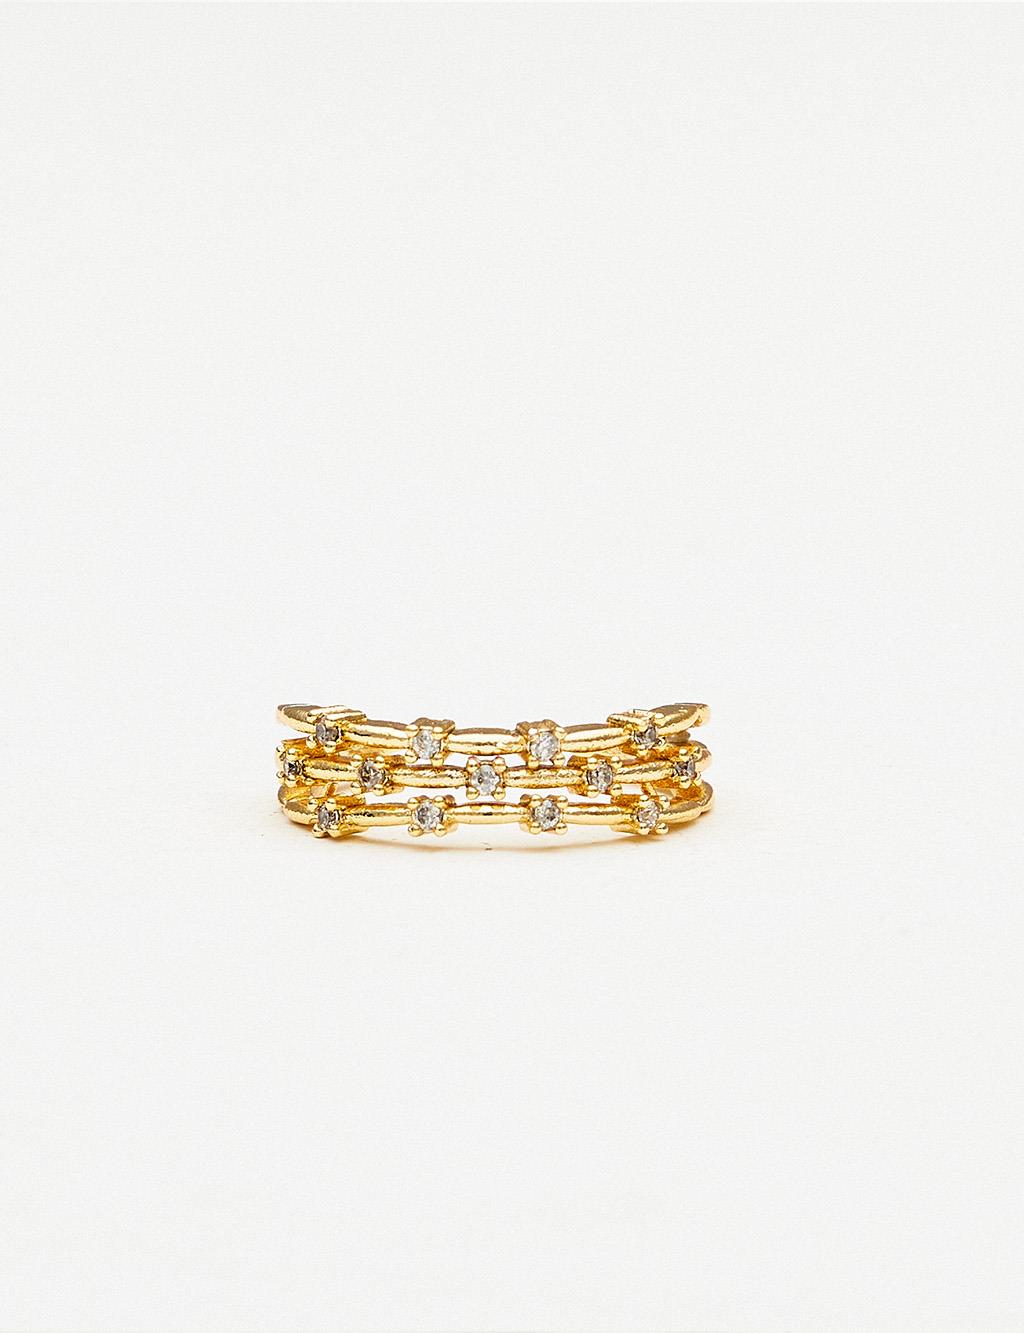 Adjustable Stone Ring Gold Color